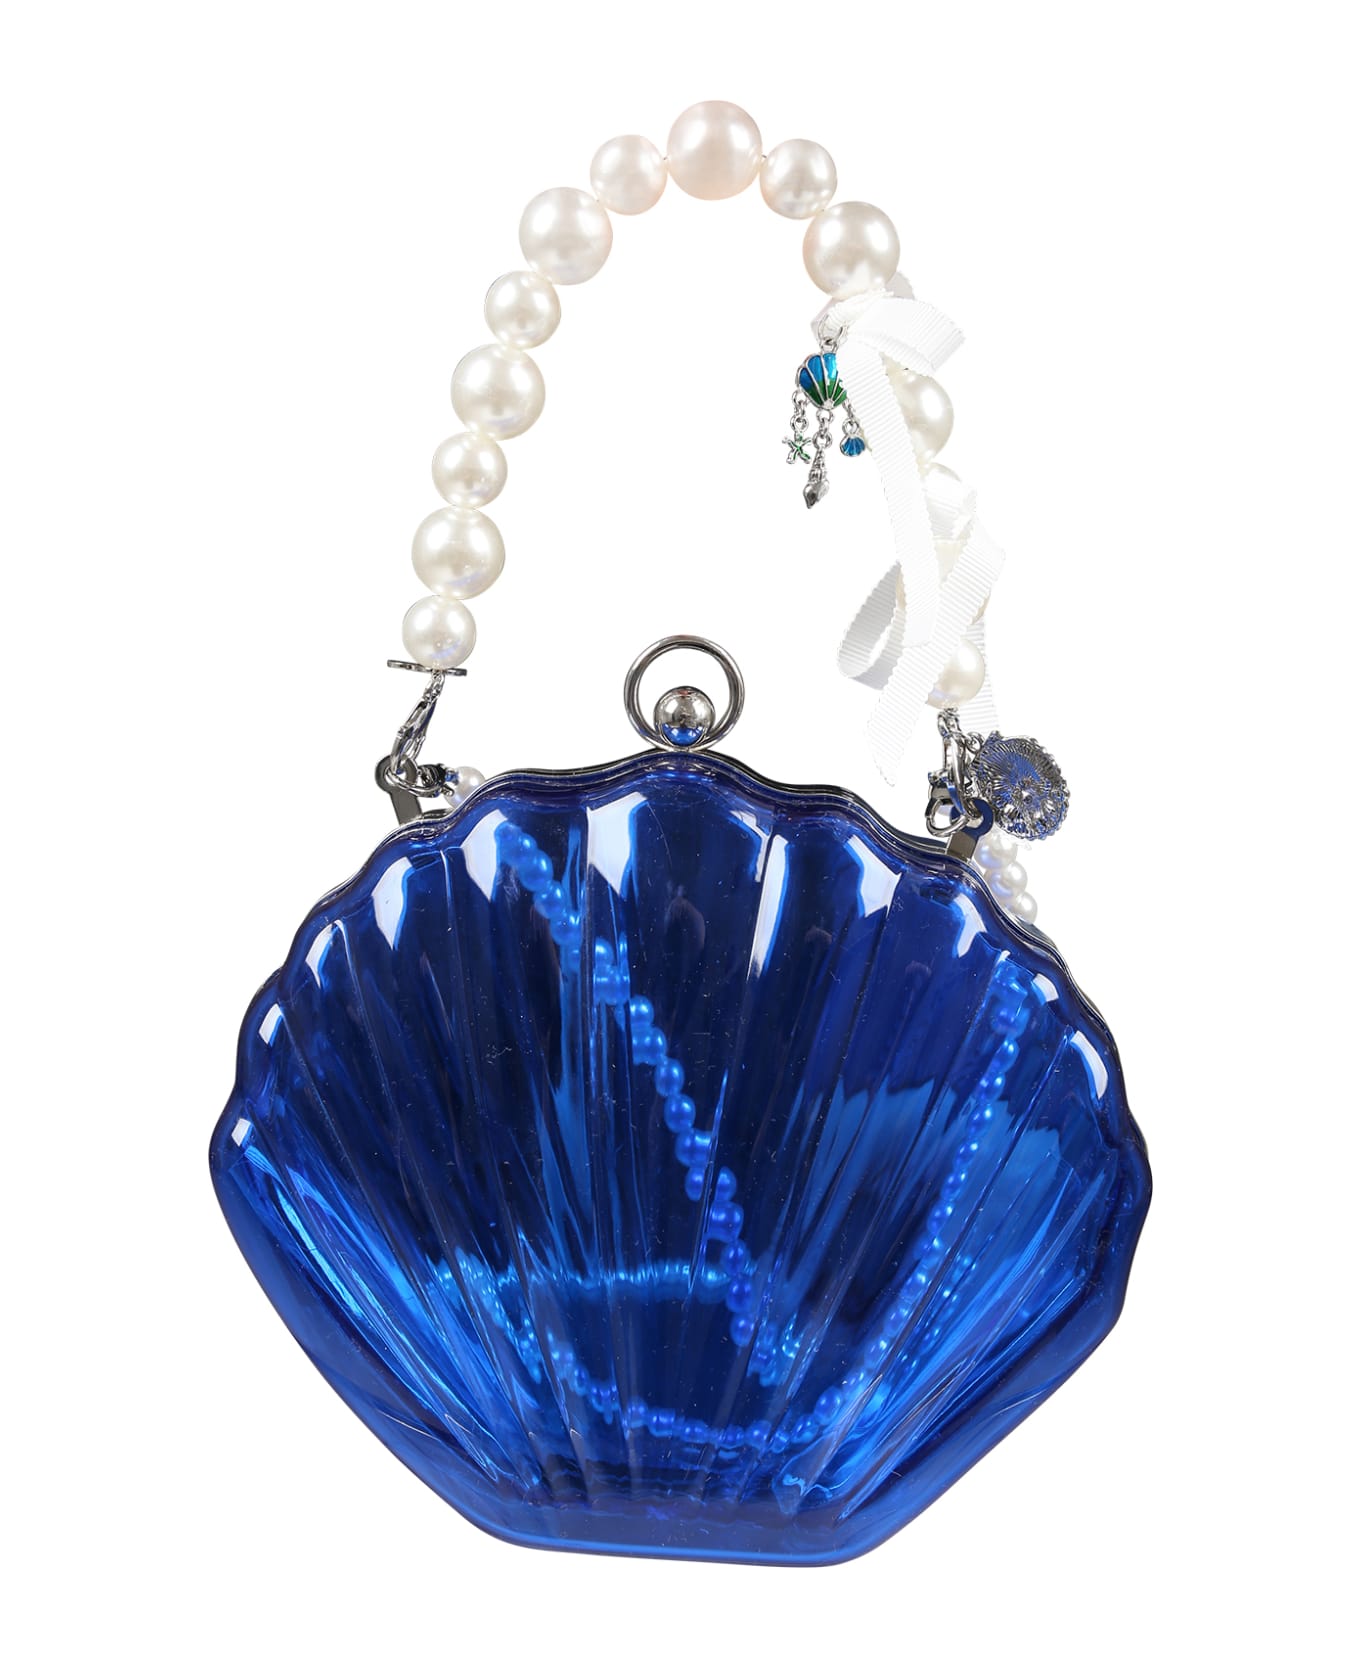 Monnalisa Blue Bag For Girl With Pearl And Shells - Blue